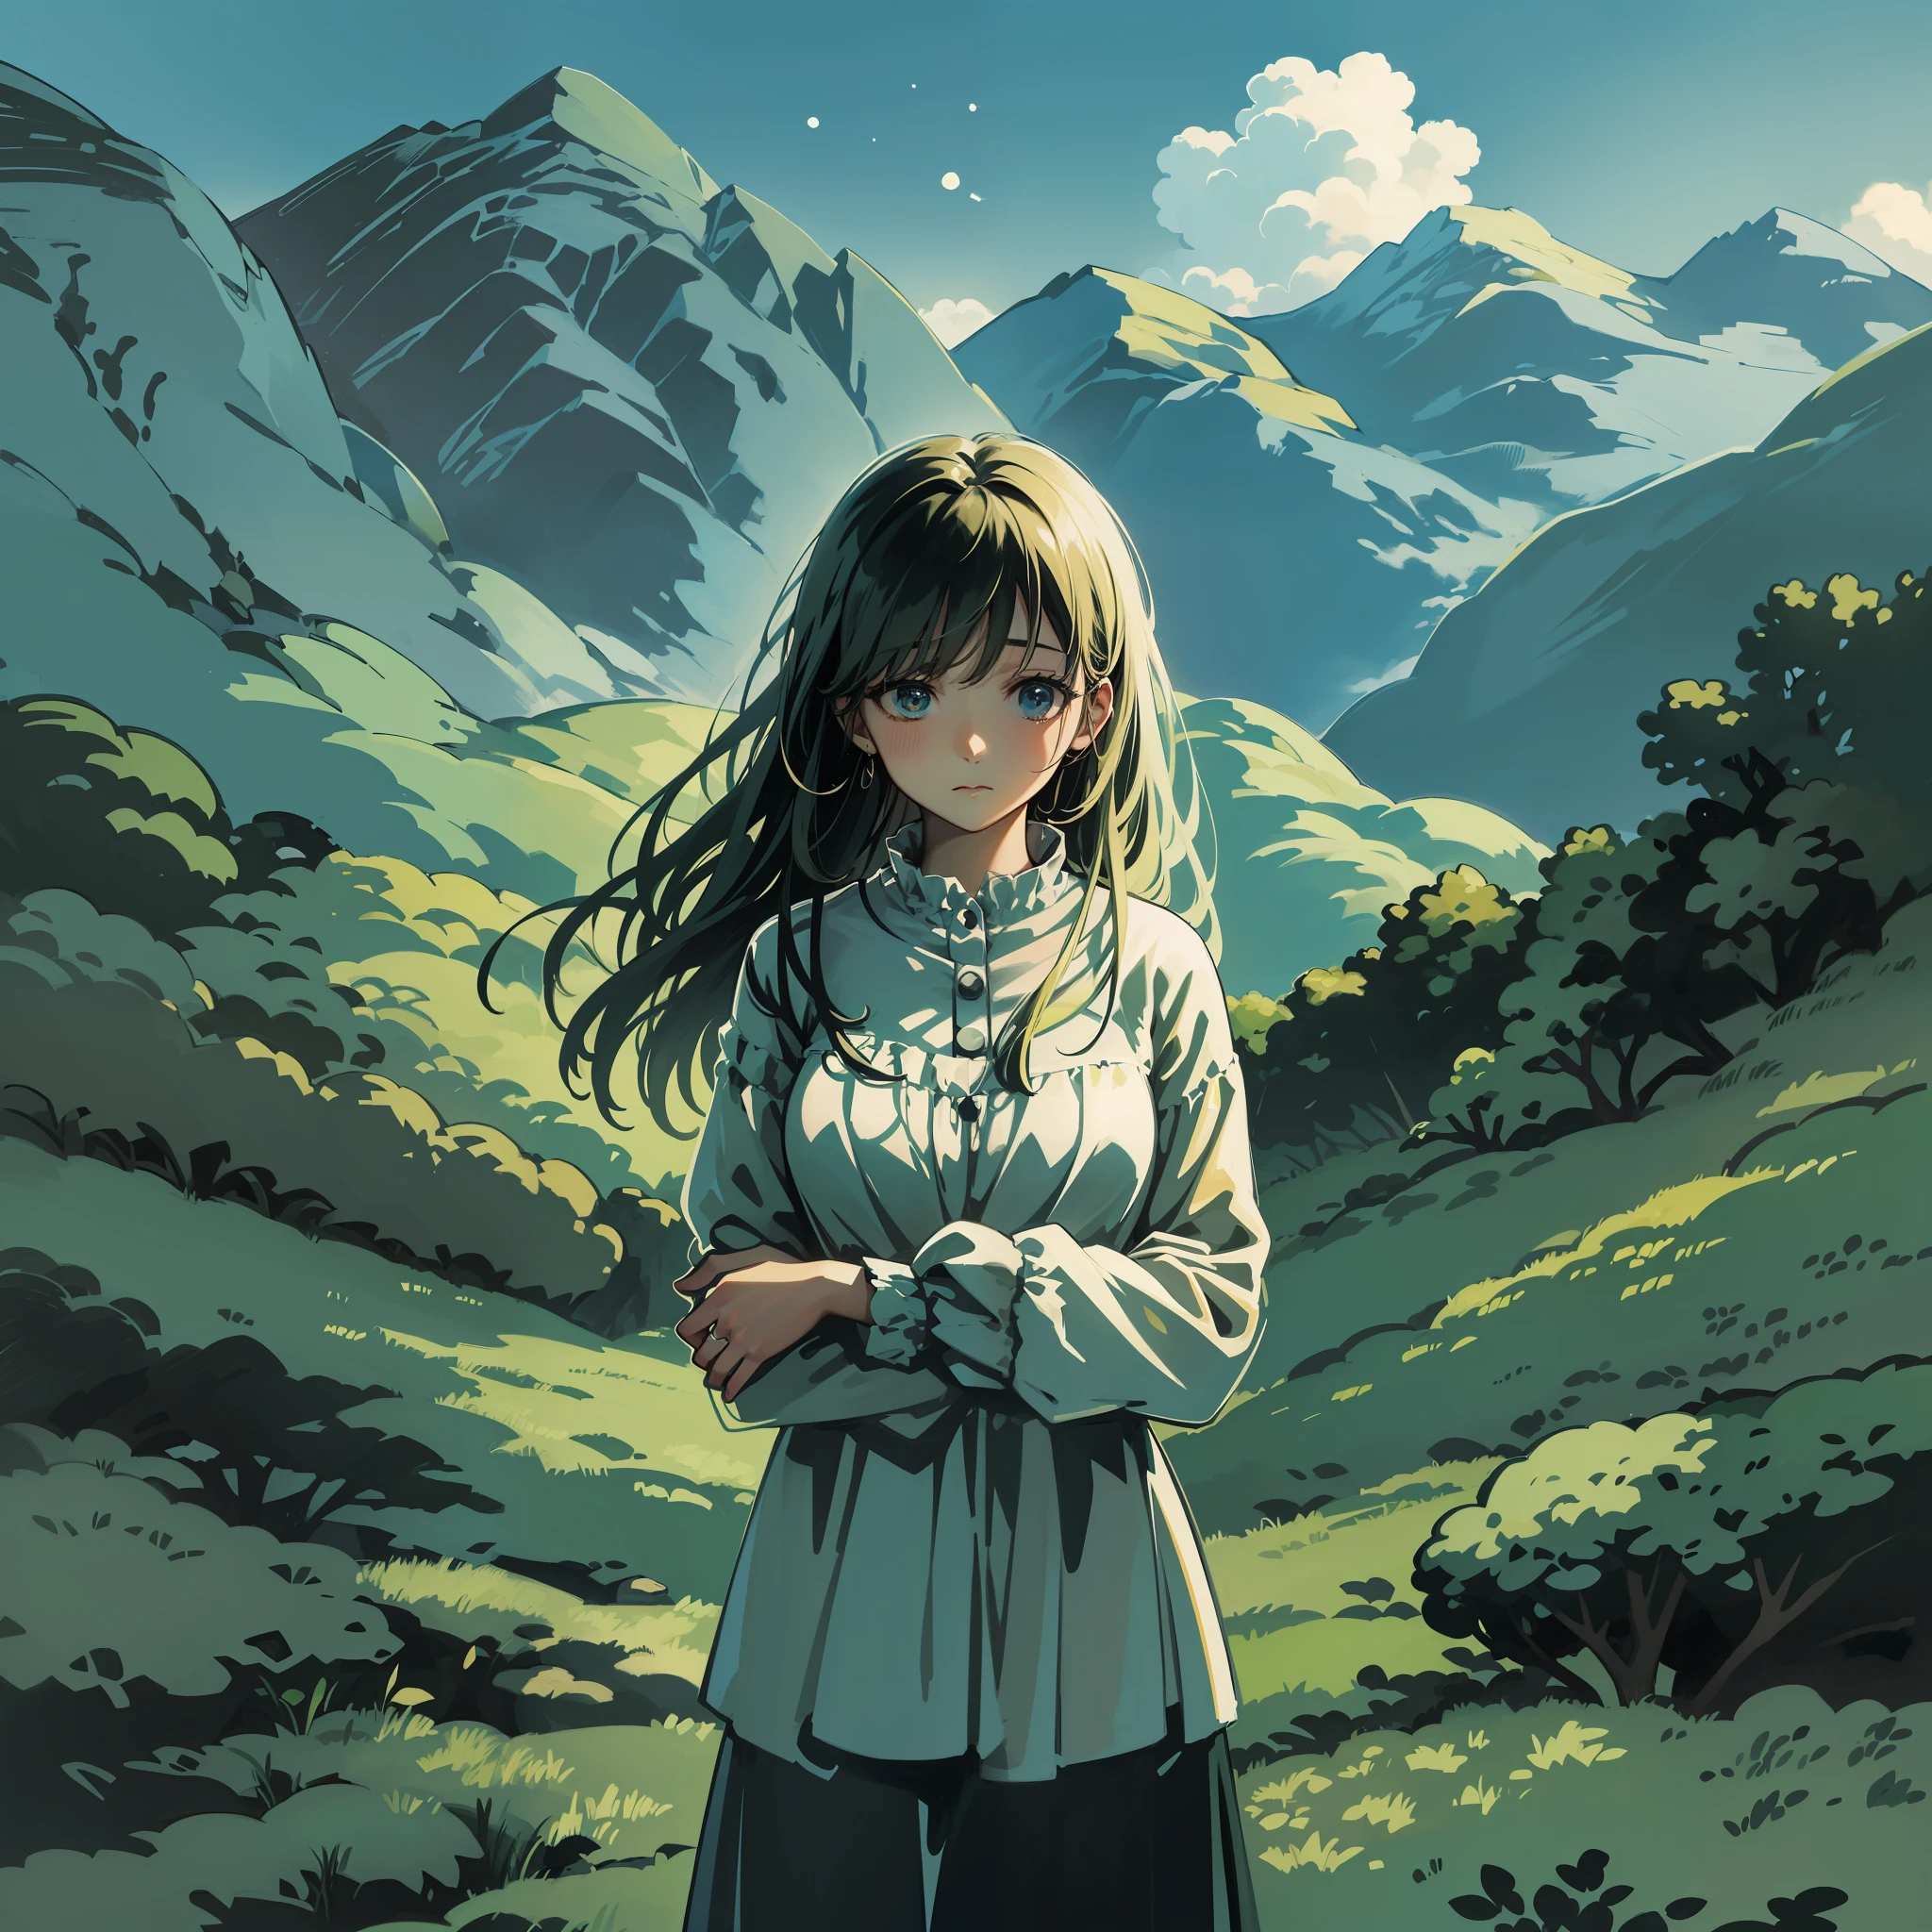 One photograph shows a person in a picturesque and secluded setting. She is standing on a mountainside, surrounded by stunning scenery but devoid of human presence. One embraces one's own loneliness in a symbolic way, with one's arms outstretched as if one were embracing one's own air. Her face displays an intense expression of passion and serenity as she finds joy and wholeness in her own company. However, a melancholic look in the eyes reveals the sadness that comes from the lack of affection and emotional connections. Loneliness is portrayed as an inseparable part of this person, who finds solace in their own existence but also feels the lack of meaningful interactions and sharing moments with others.